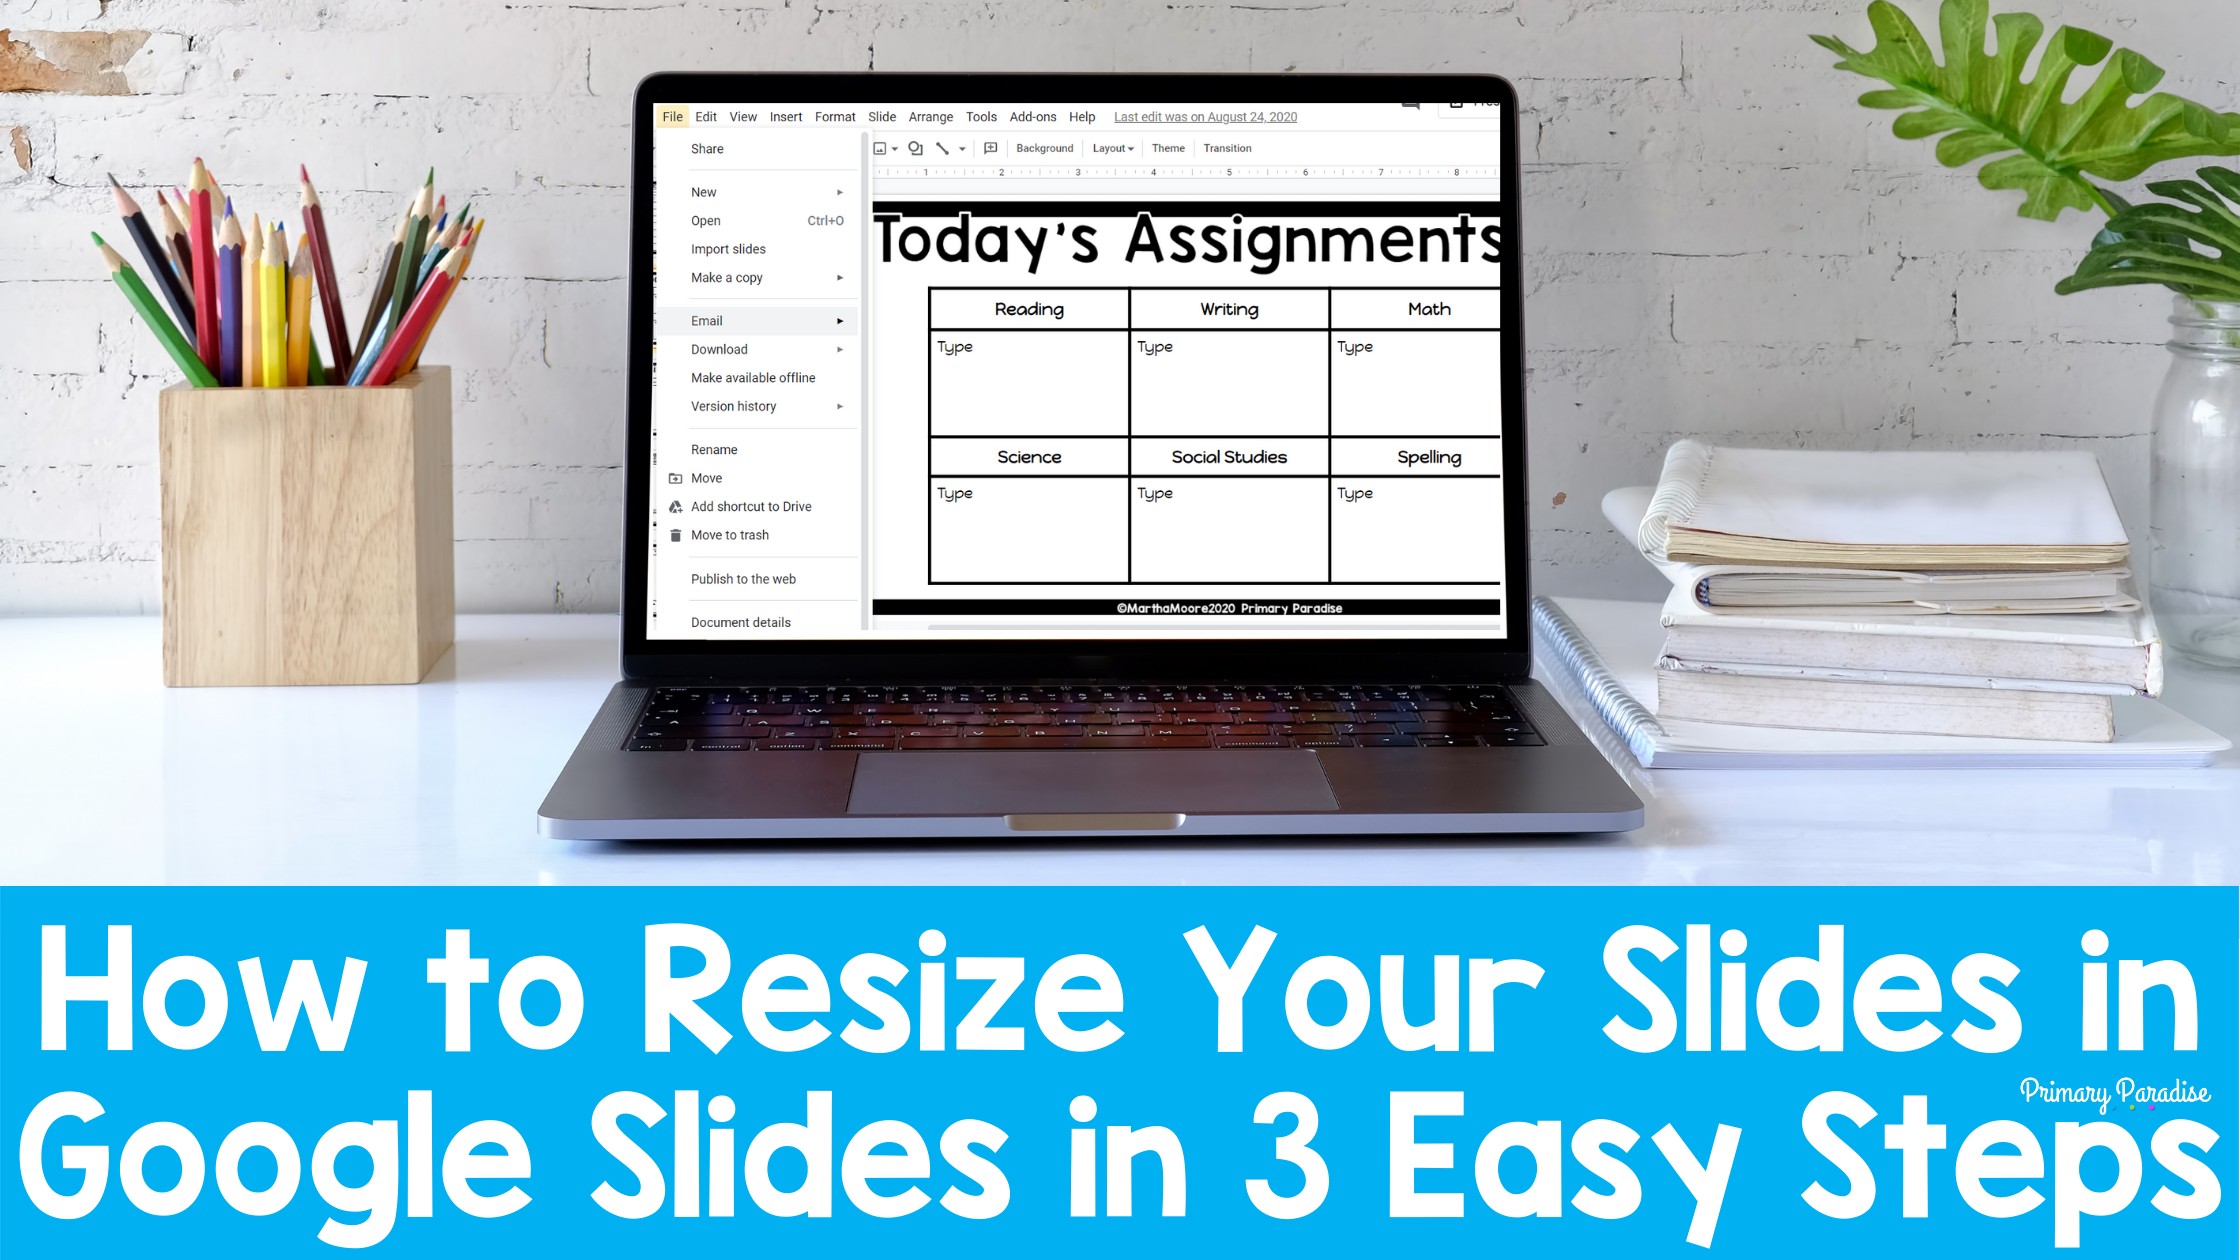 How to Resize Your Slides in Google Slides in 3 Easy Steps